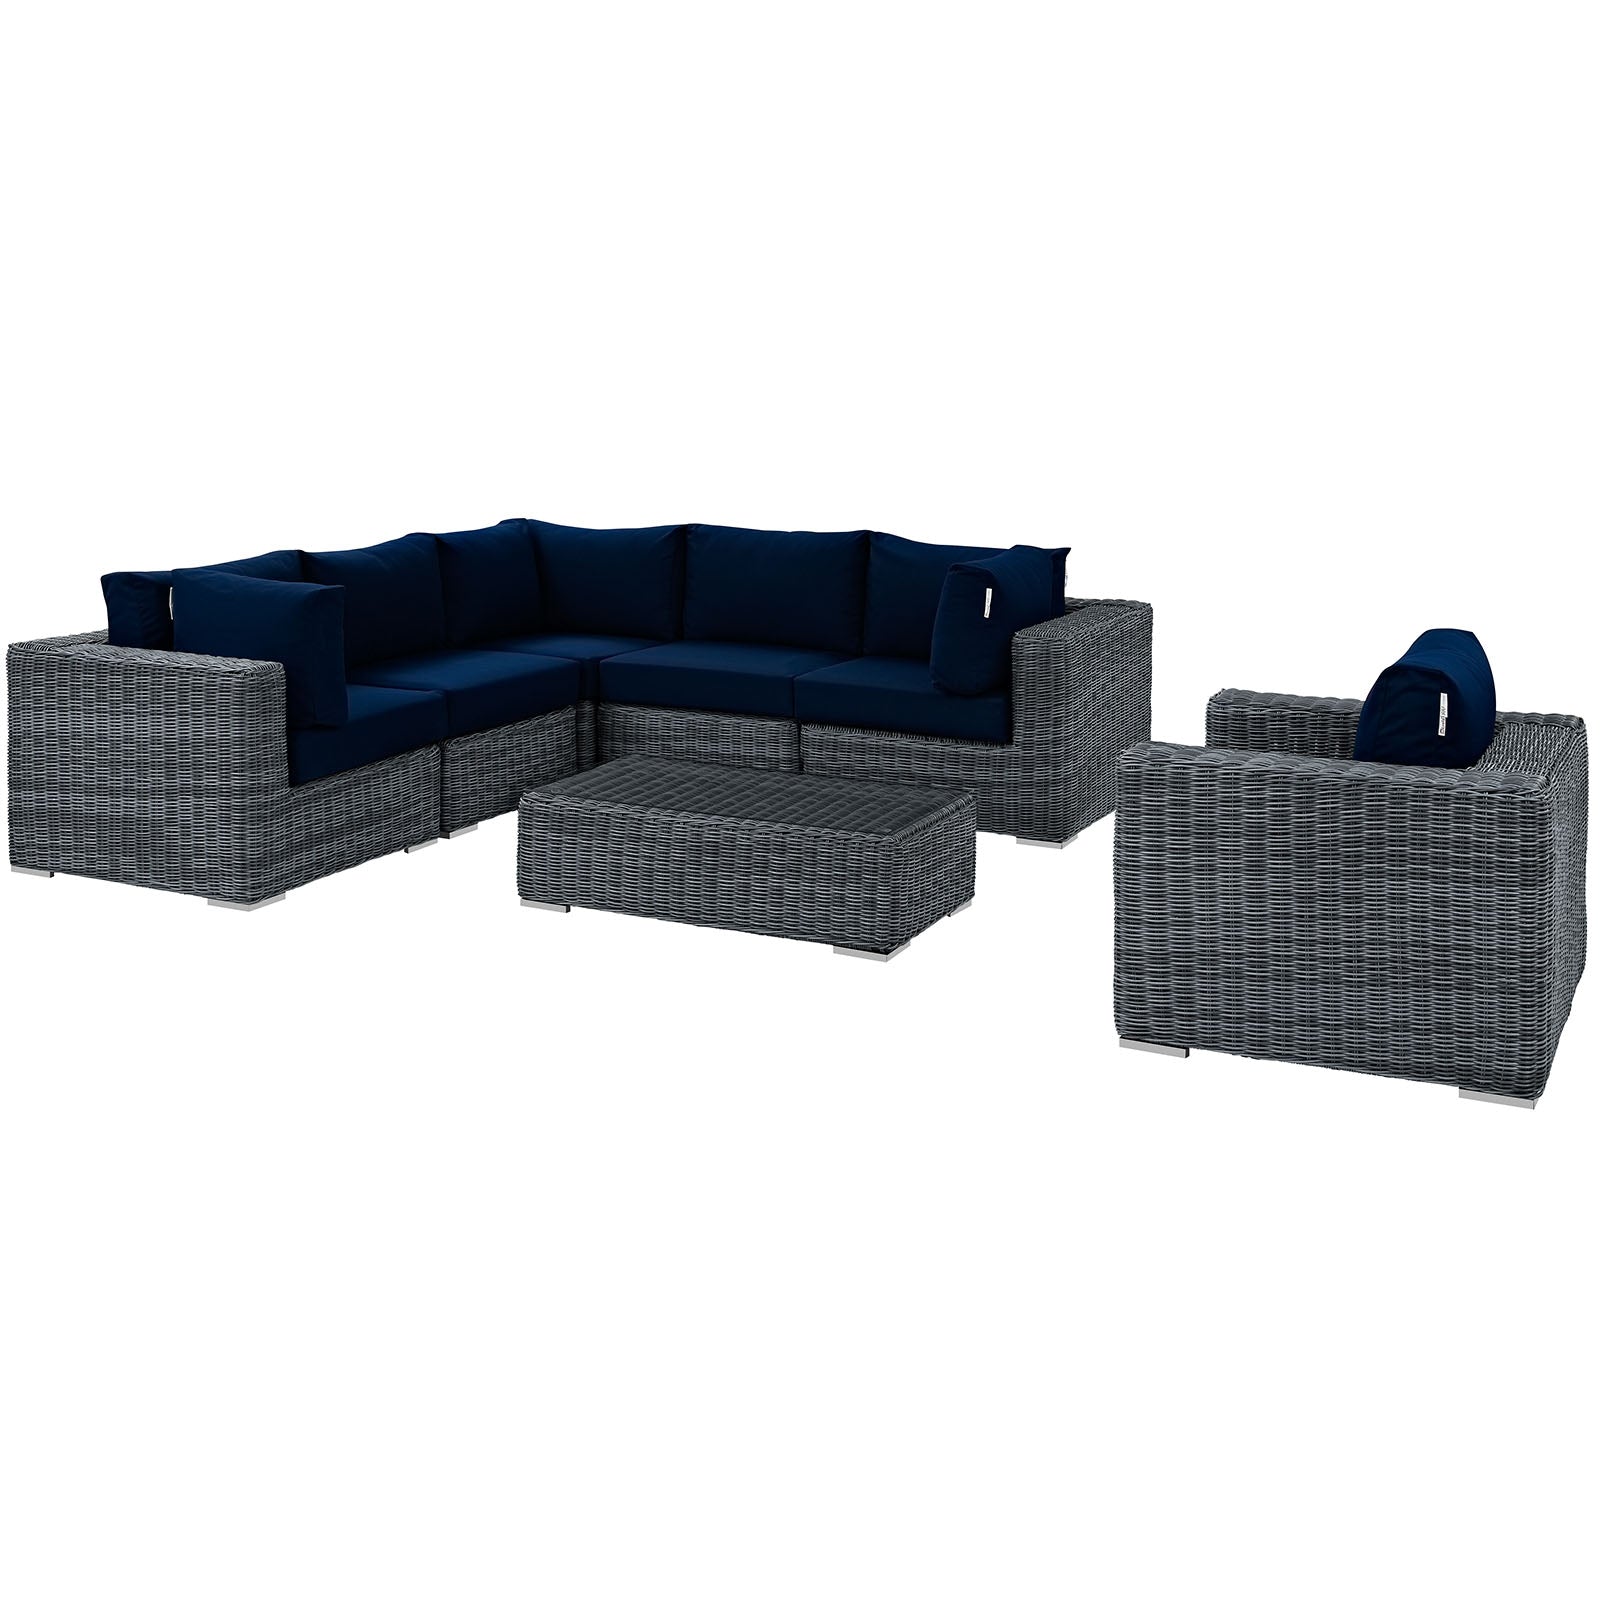 Modway Outdoor Conversation Sets - Summon 7 Piece Outdoor Patio Sectional Set Canvas Navy